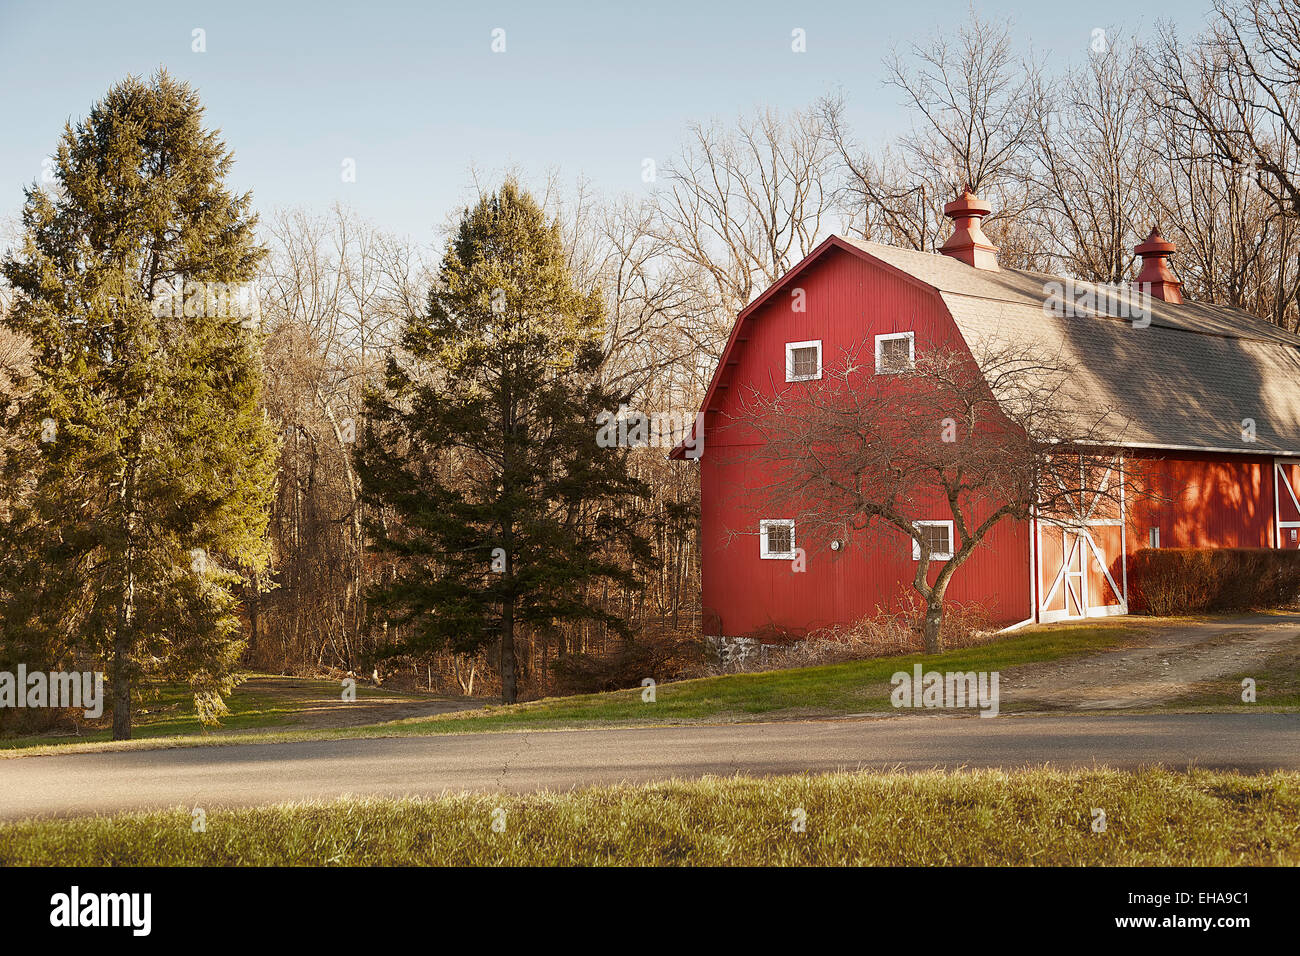 And old red barn on a farm with trees in a field. Stock Photo